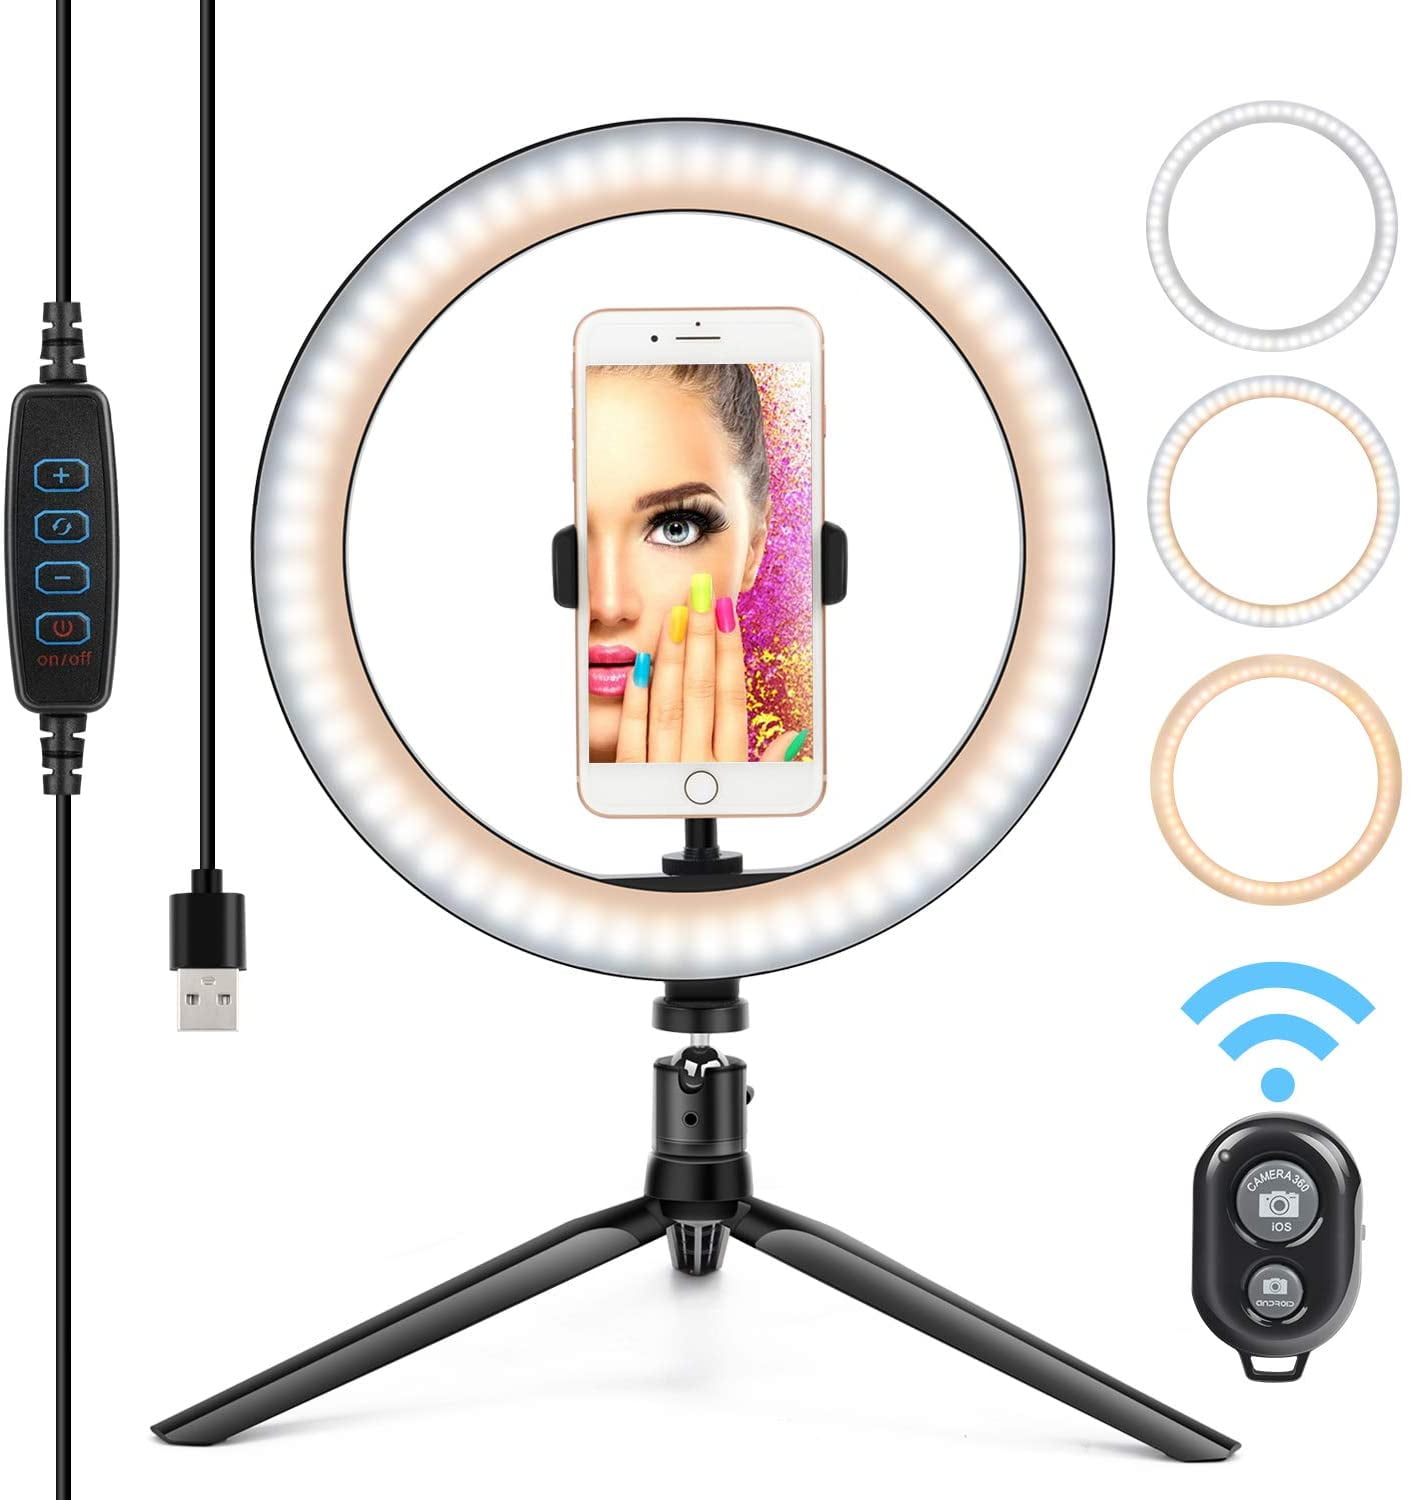 SEENDA 12 Desktop Selfie Ring Light with Stand Compatible with iPhone/Android Extendable Tripod Makeup Photography Flexible Phone Holder for Live Streaming Video Recording&Webcam Chat 